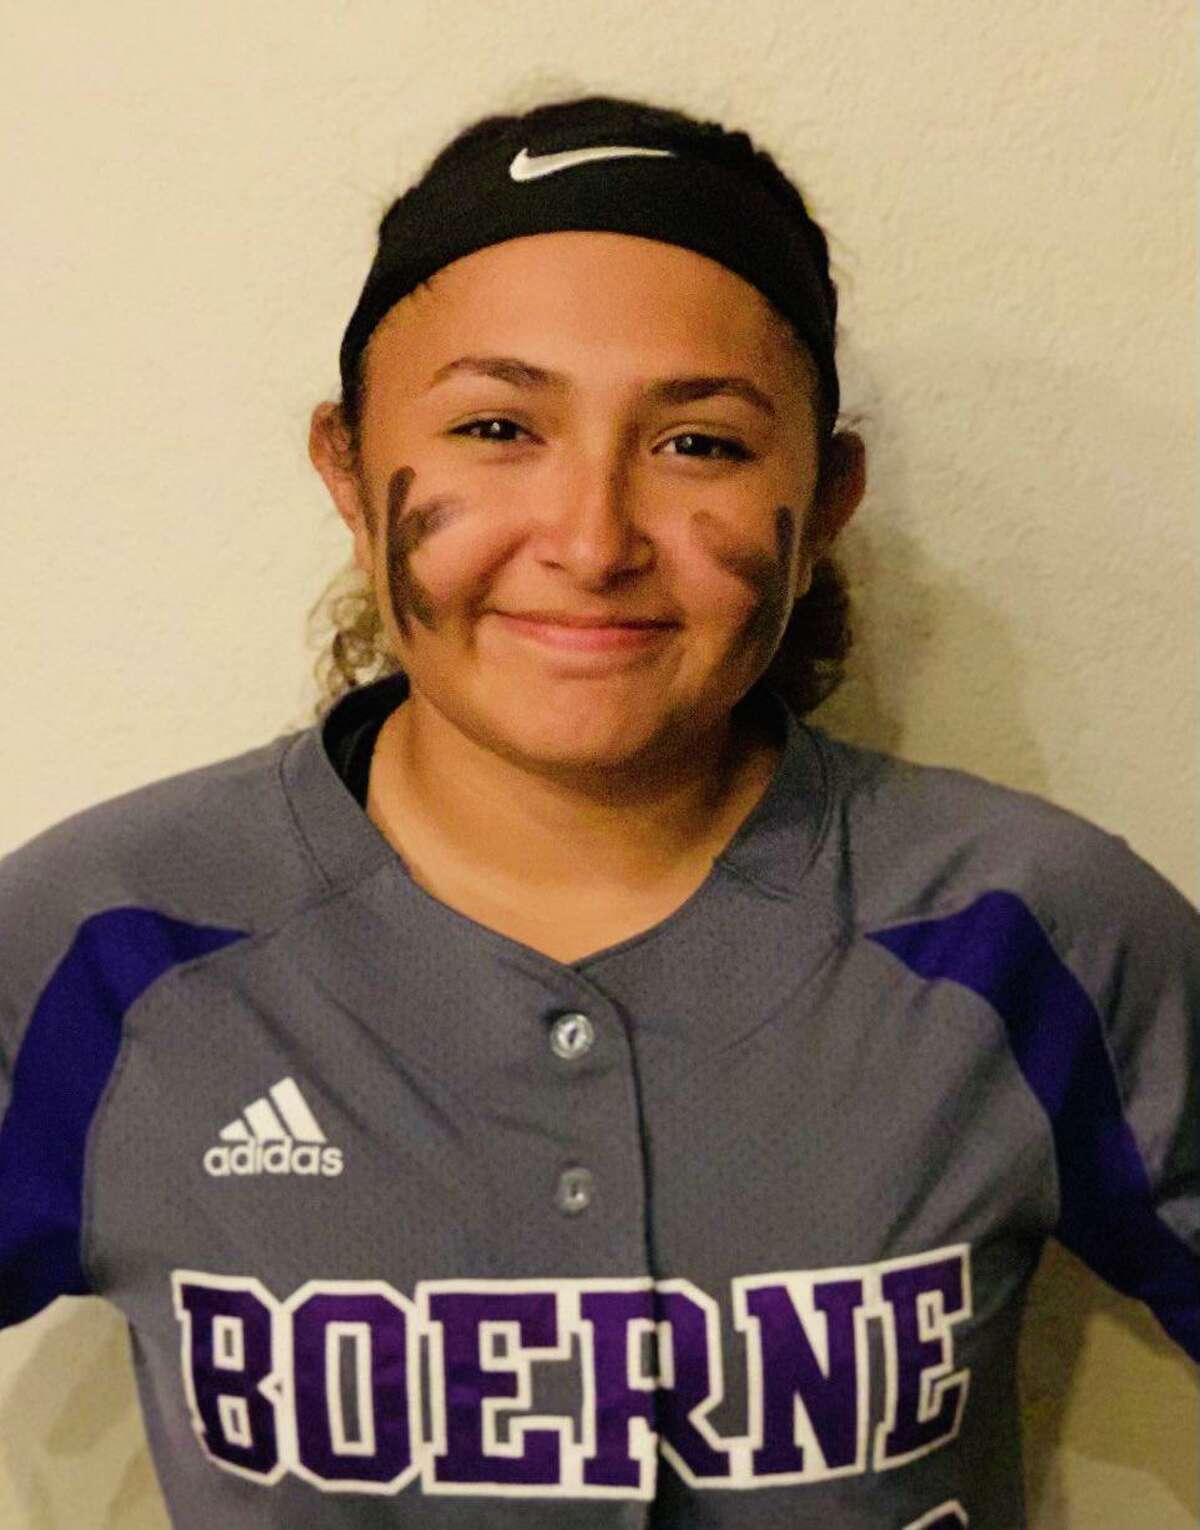 Ava Rodriguez is a sophomore pitcher for Boerne softball.